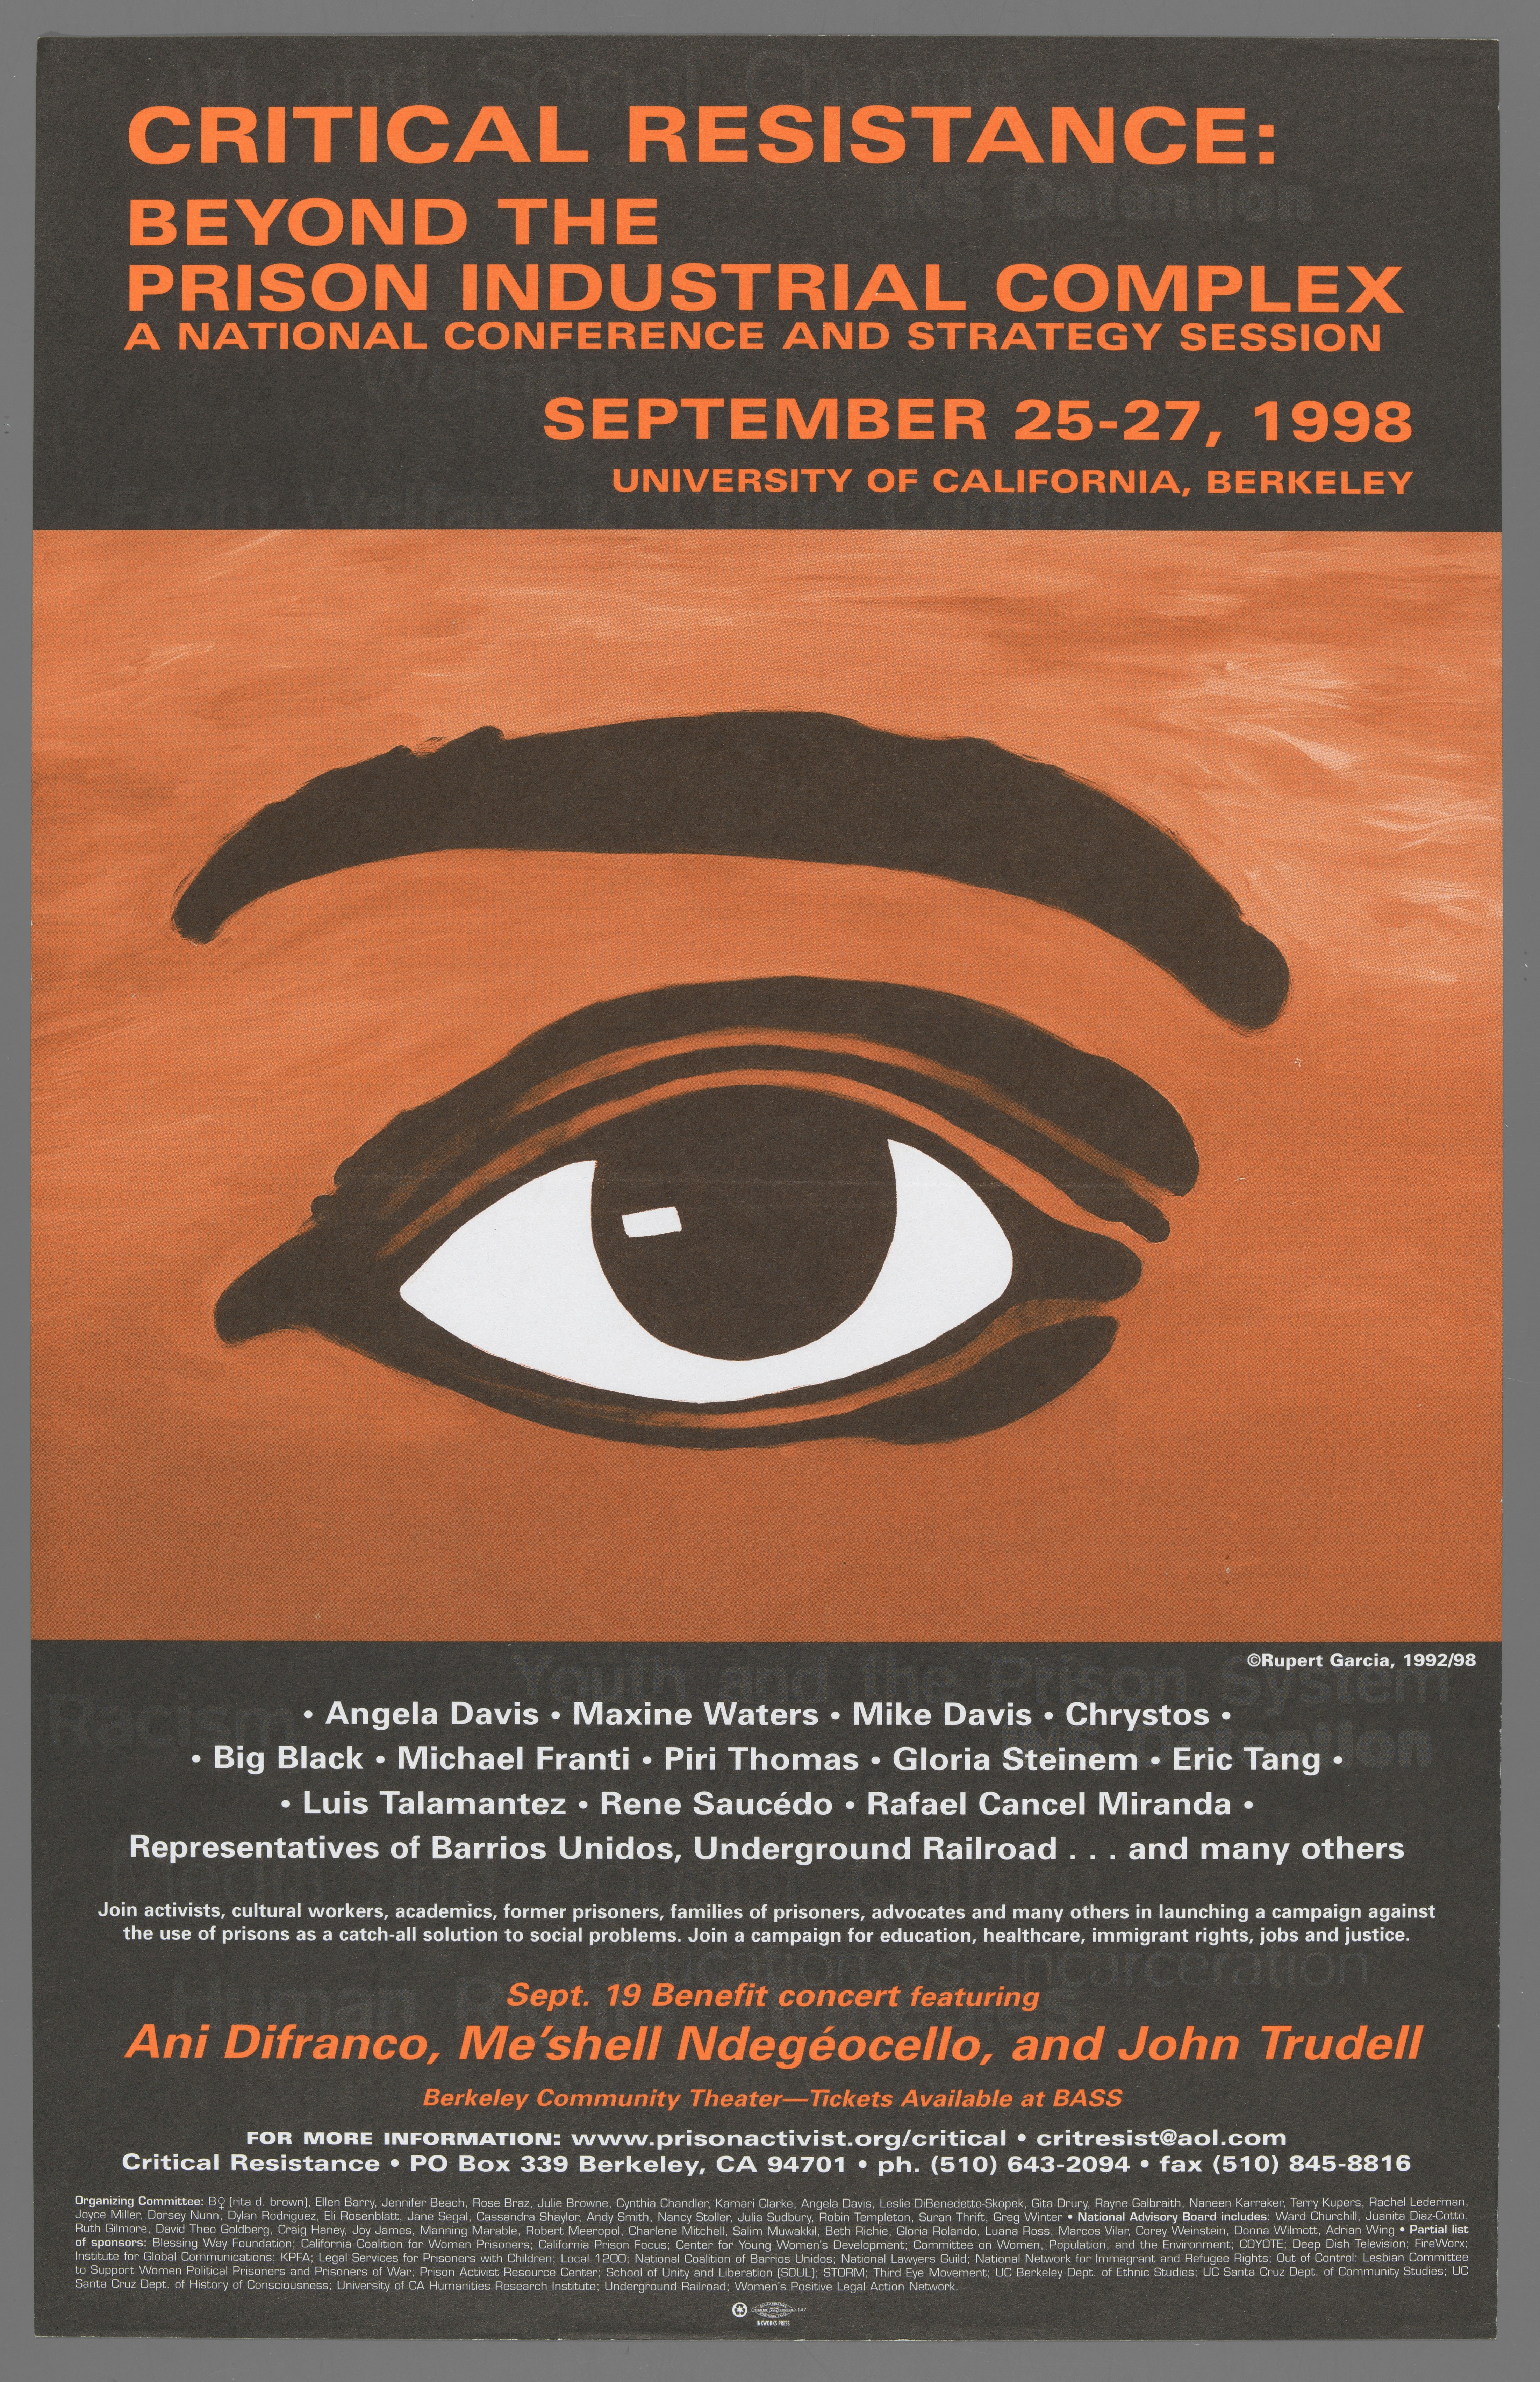 Critical Resistance Poster with image of singular eyeball and eyebrow. Background is in a burnt orange color.